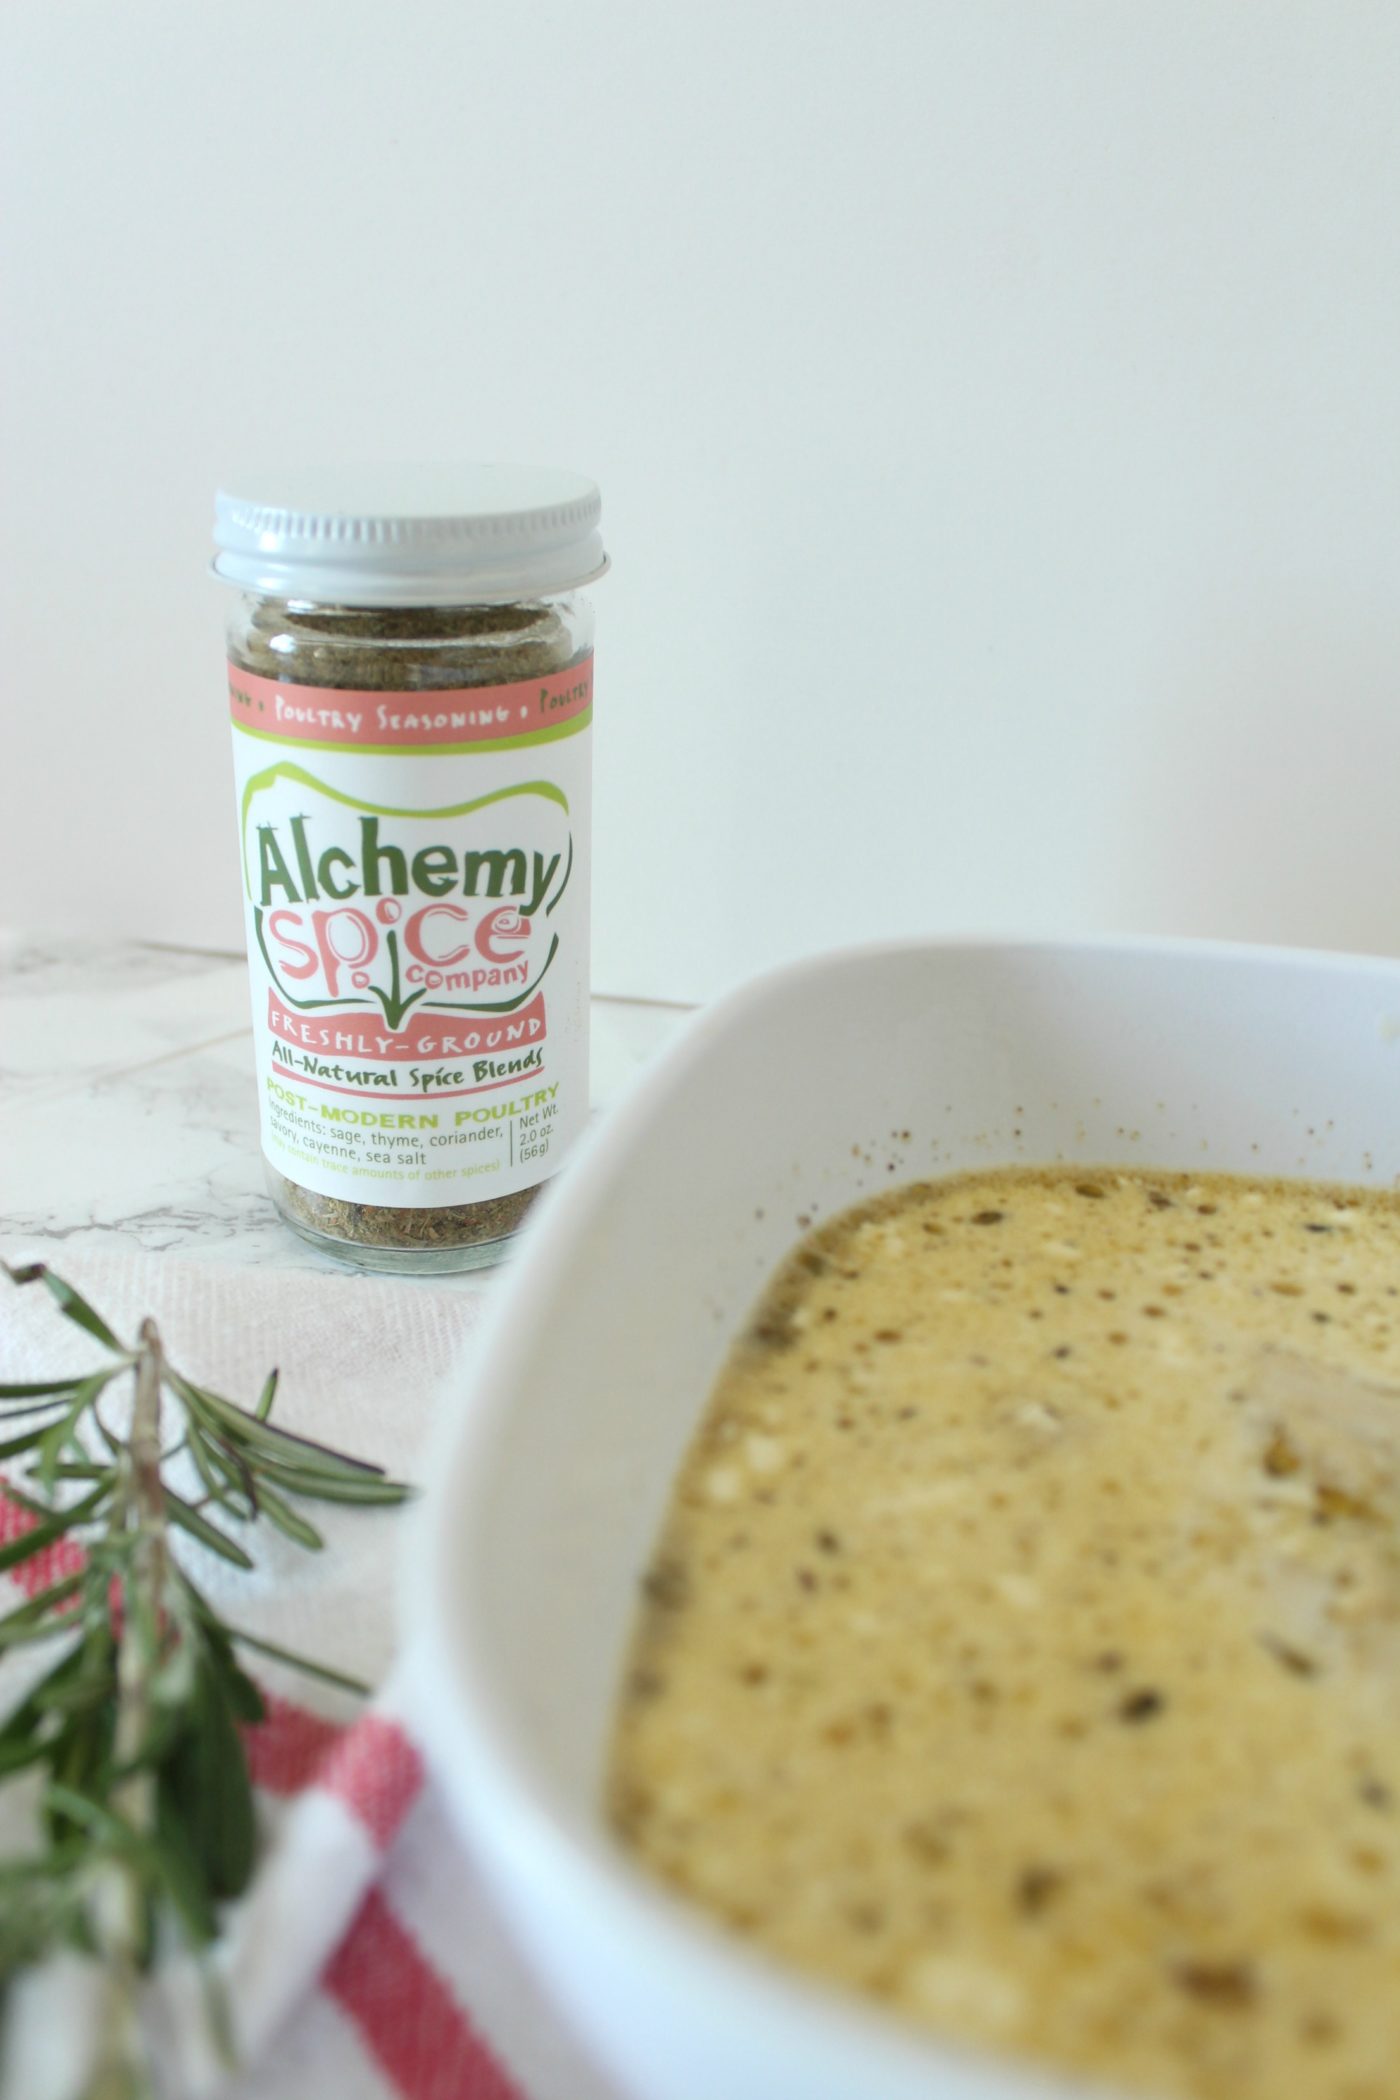 Alchemy Spic Company is a Tennessee based spice company that features lots of spice goodness. The poultry seasoning is great in soup and poultry, of course.